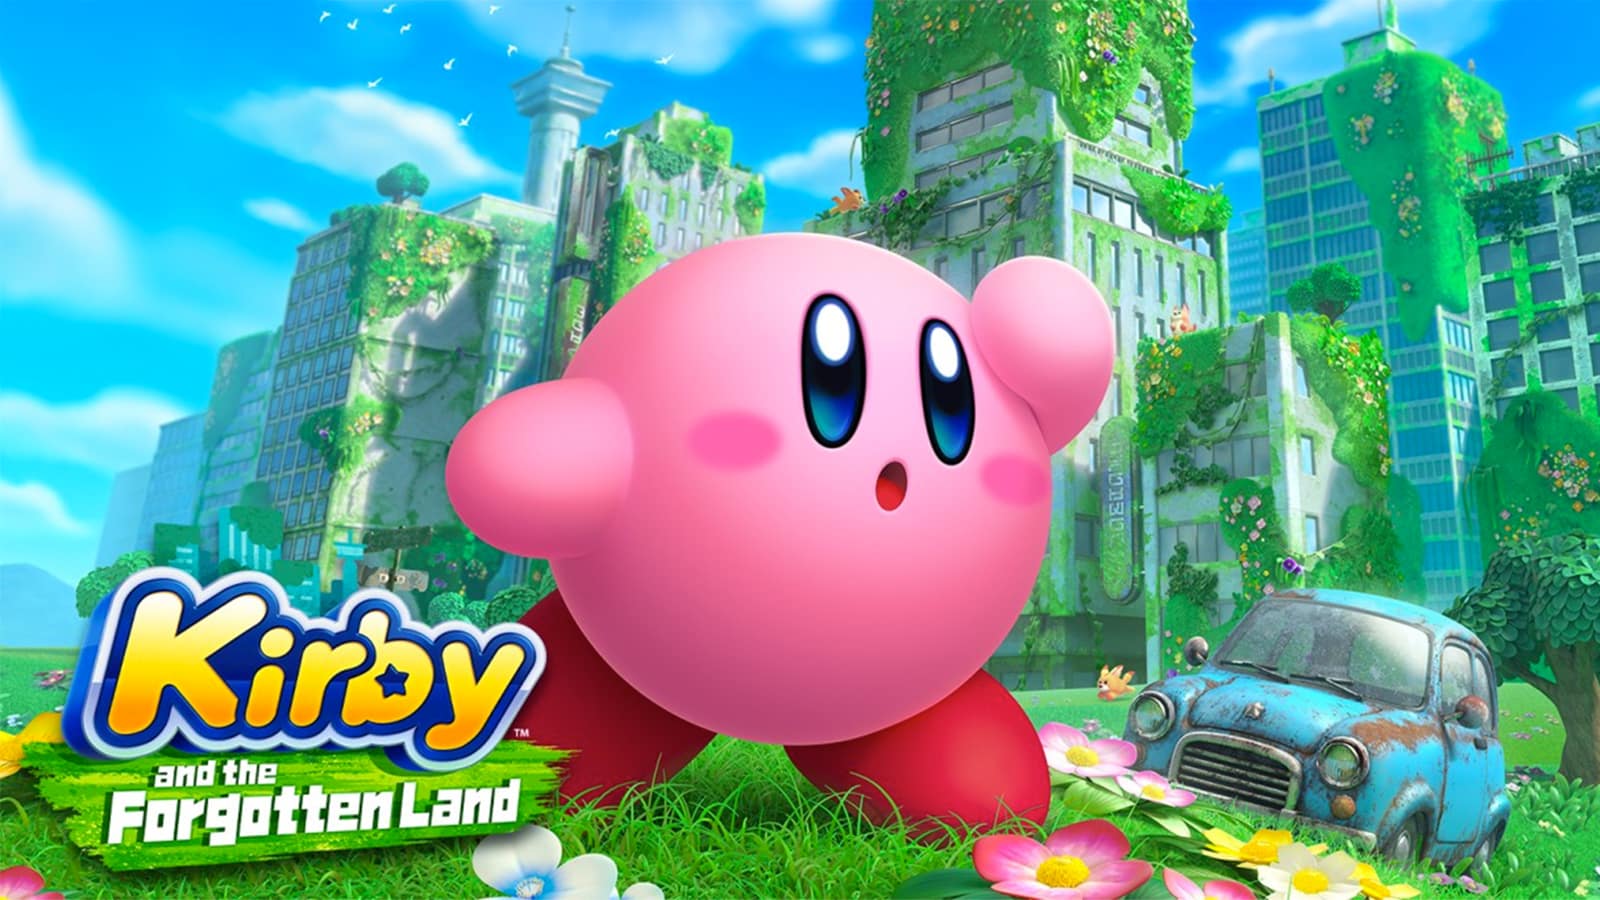 Every Present Code And Their Reward In Kirby And The Forgotten Land